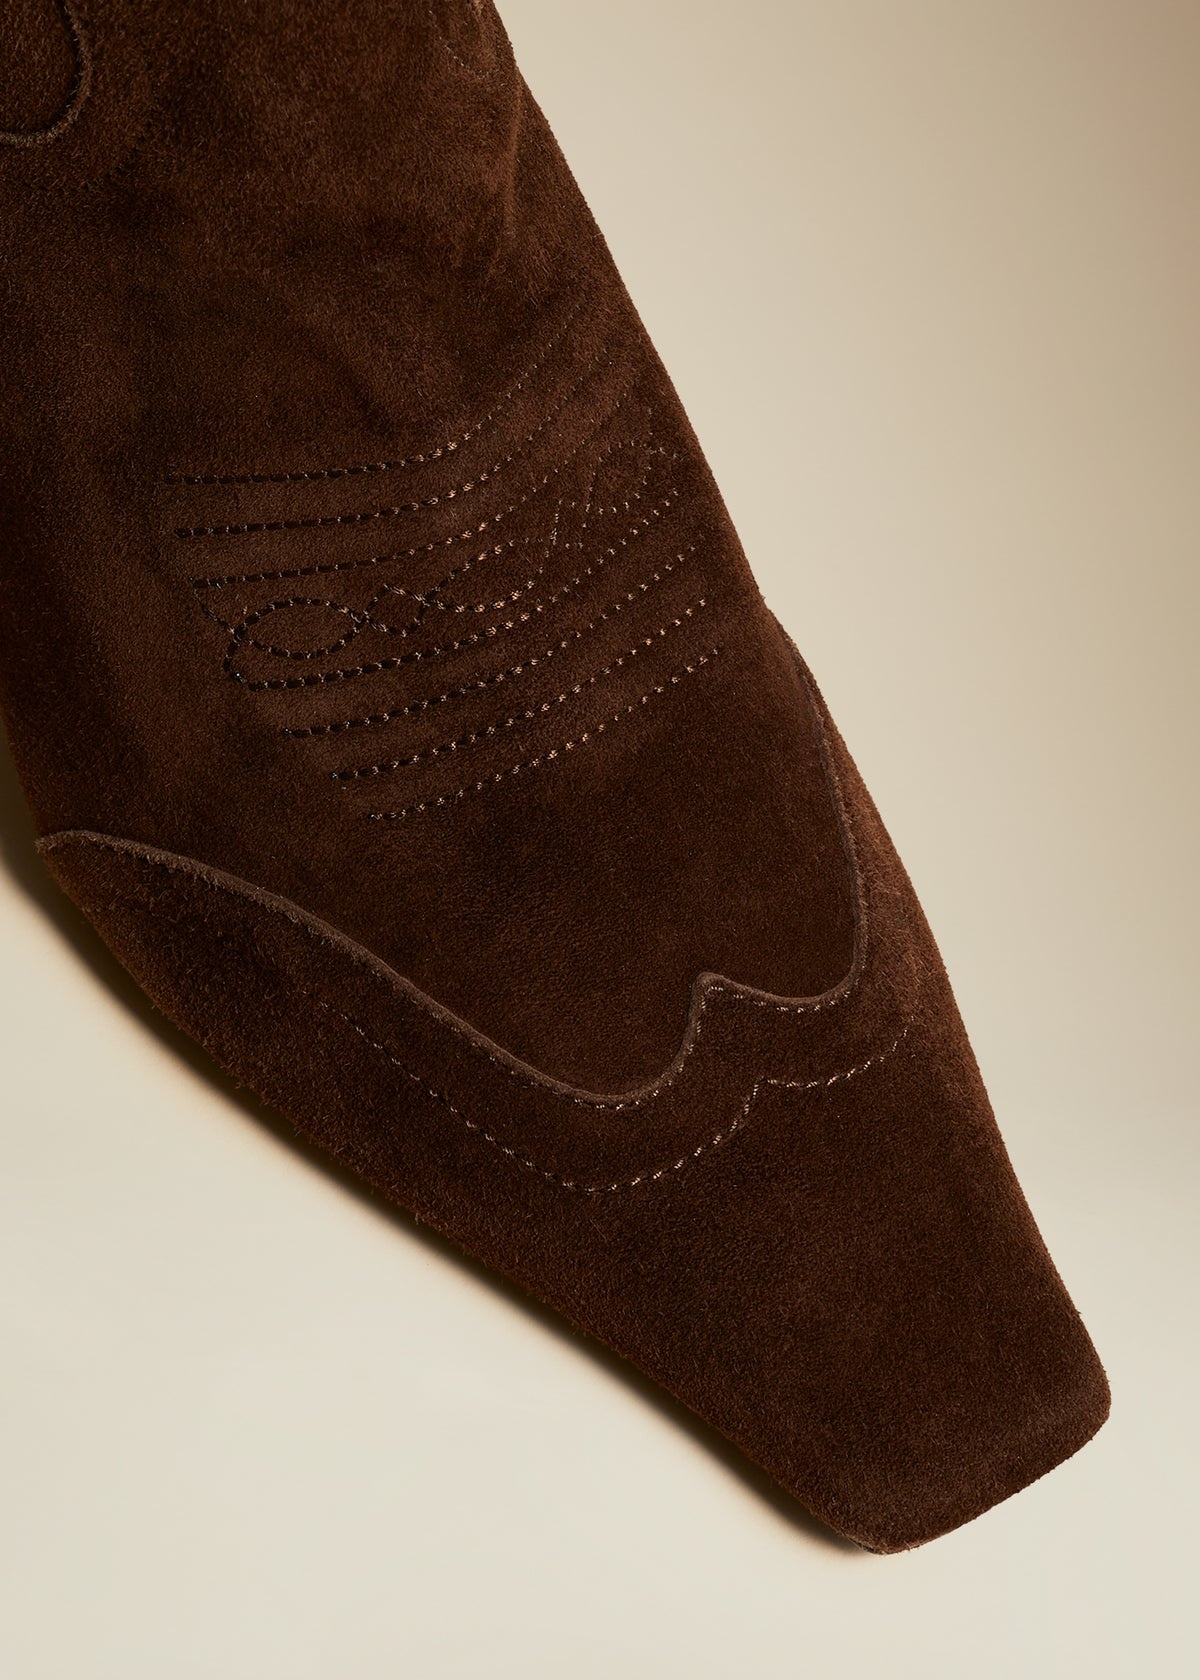 The Dallas Knee High Boot in Coffee Suede - 4